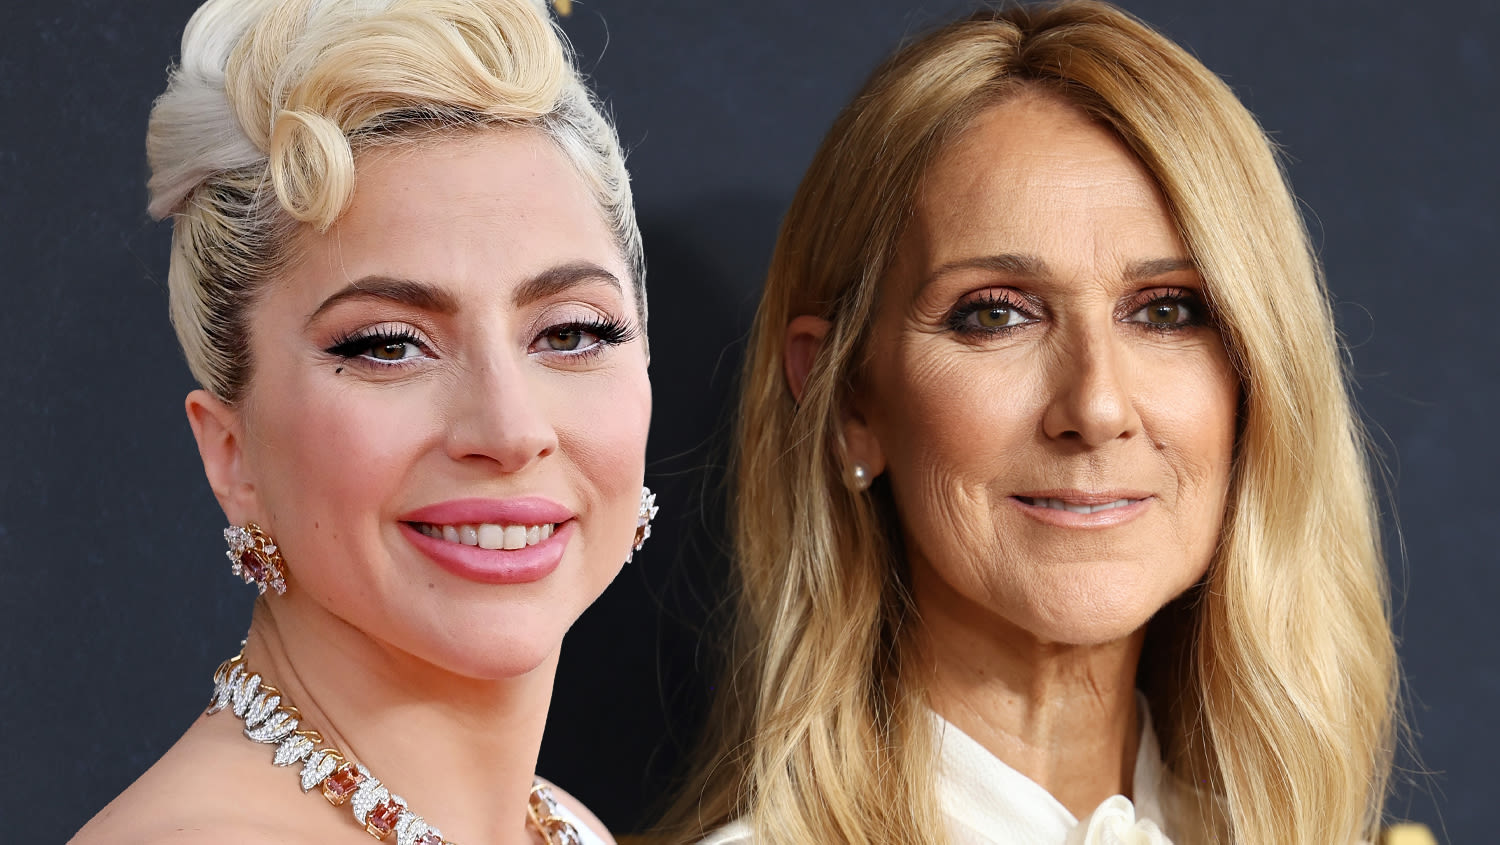 Celine Dion & Lady Gaga Will Perform At Olympics Opening Ceremony – Update